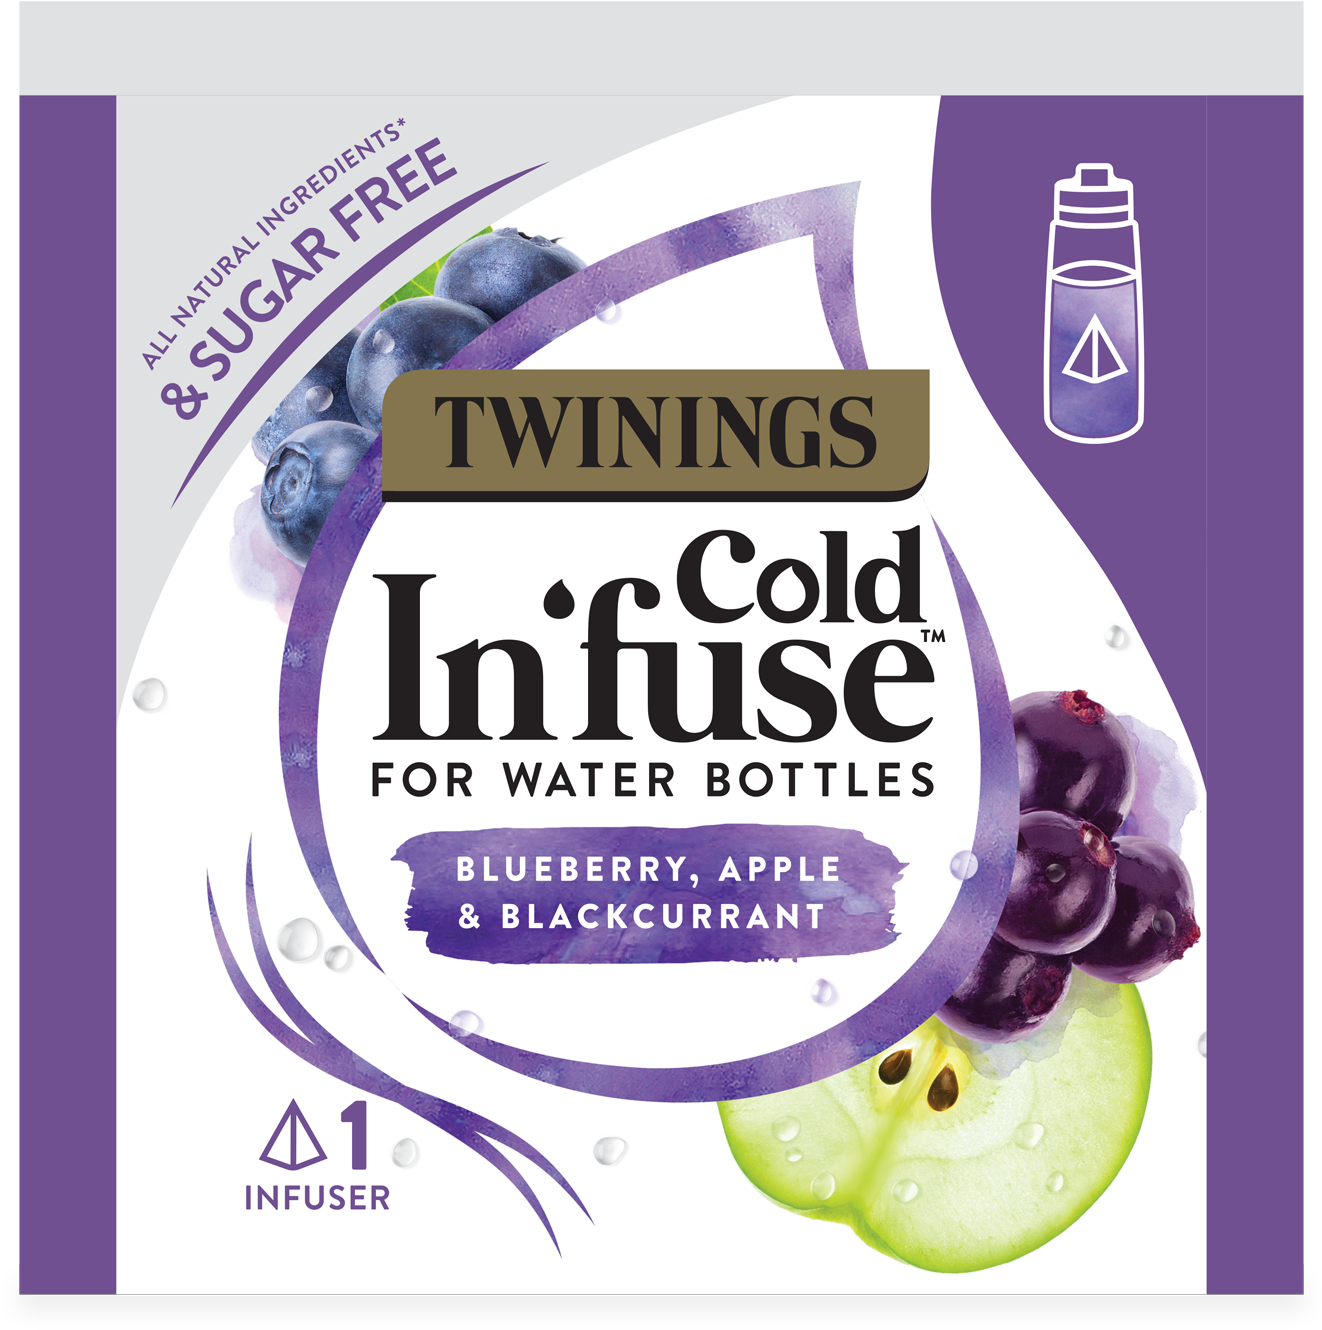 Twinings Cold Infuse Blueberry Apple Blackcurrant PNG